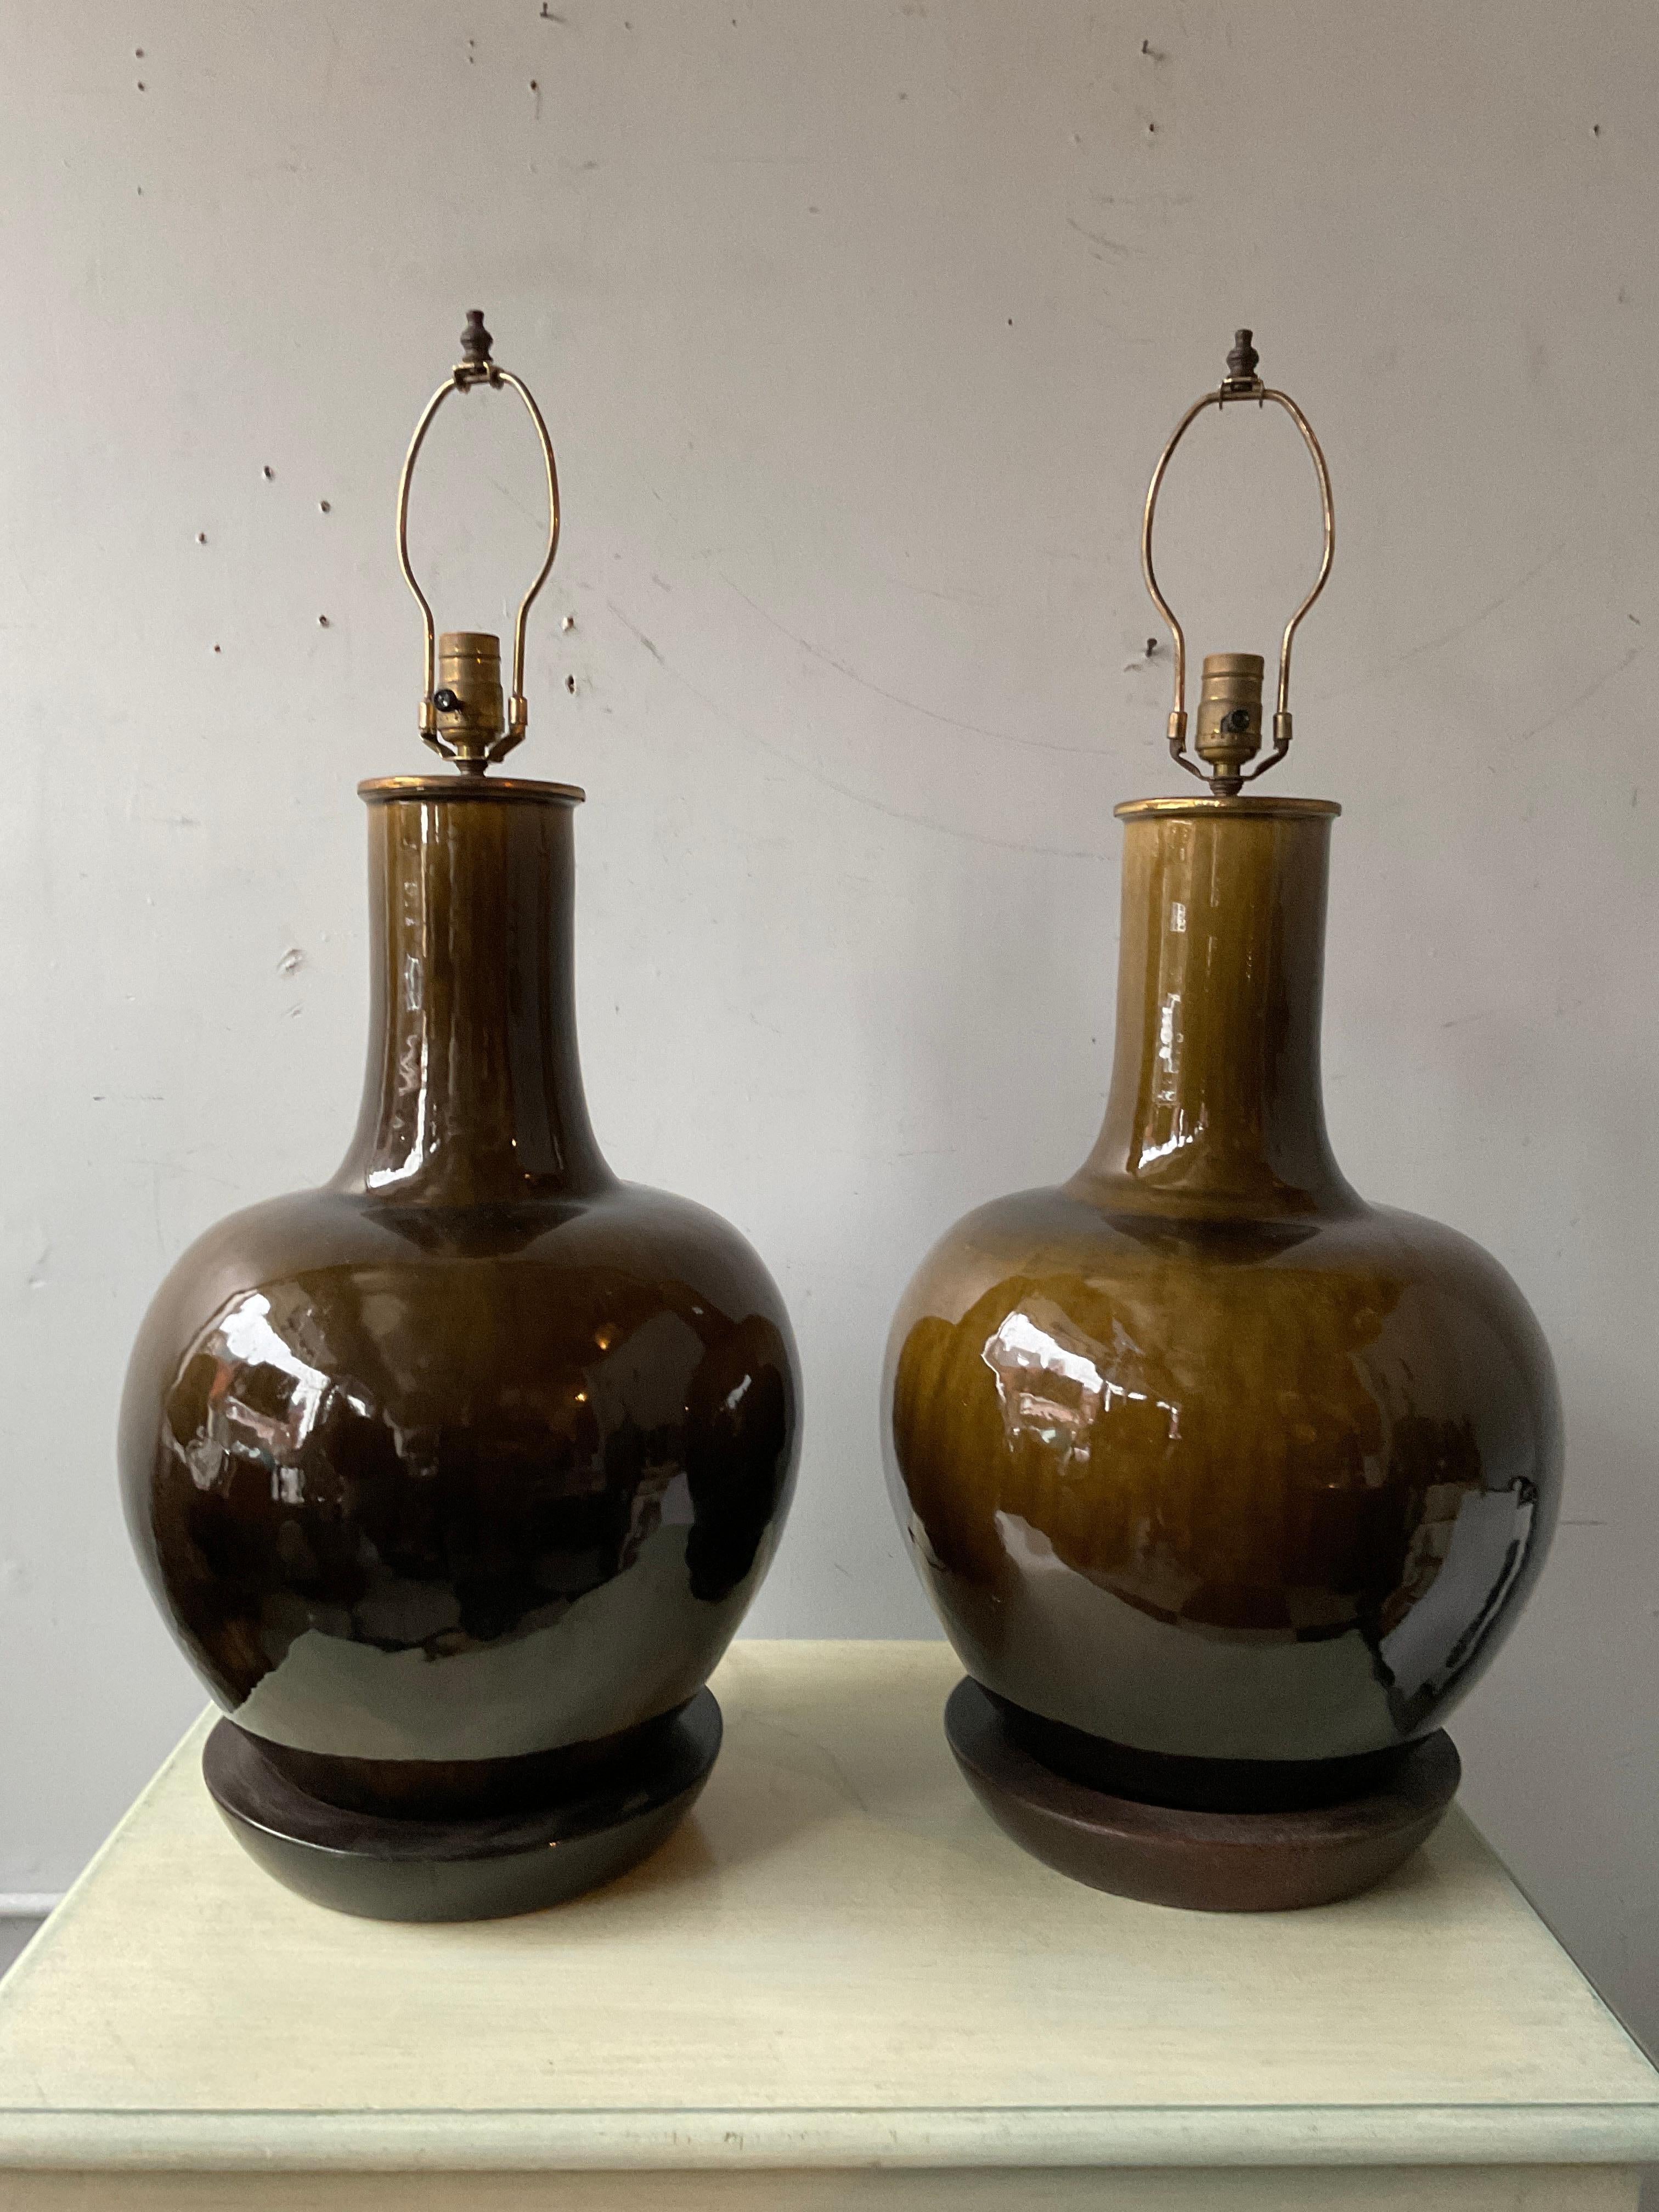 Pair of 1950s large  chunky Thai ceramic glazed ginger jar lamps. Brass top caps.   Wood bases. Height  of 25” is to top of socket.
Lamps need rewiring.
Wood bases need refinishing as shown in last picture.